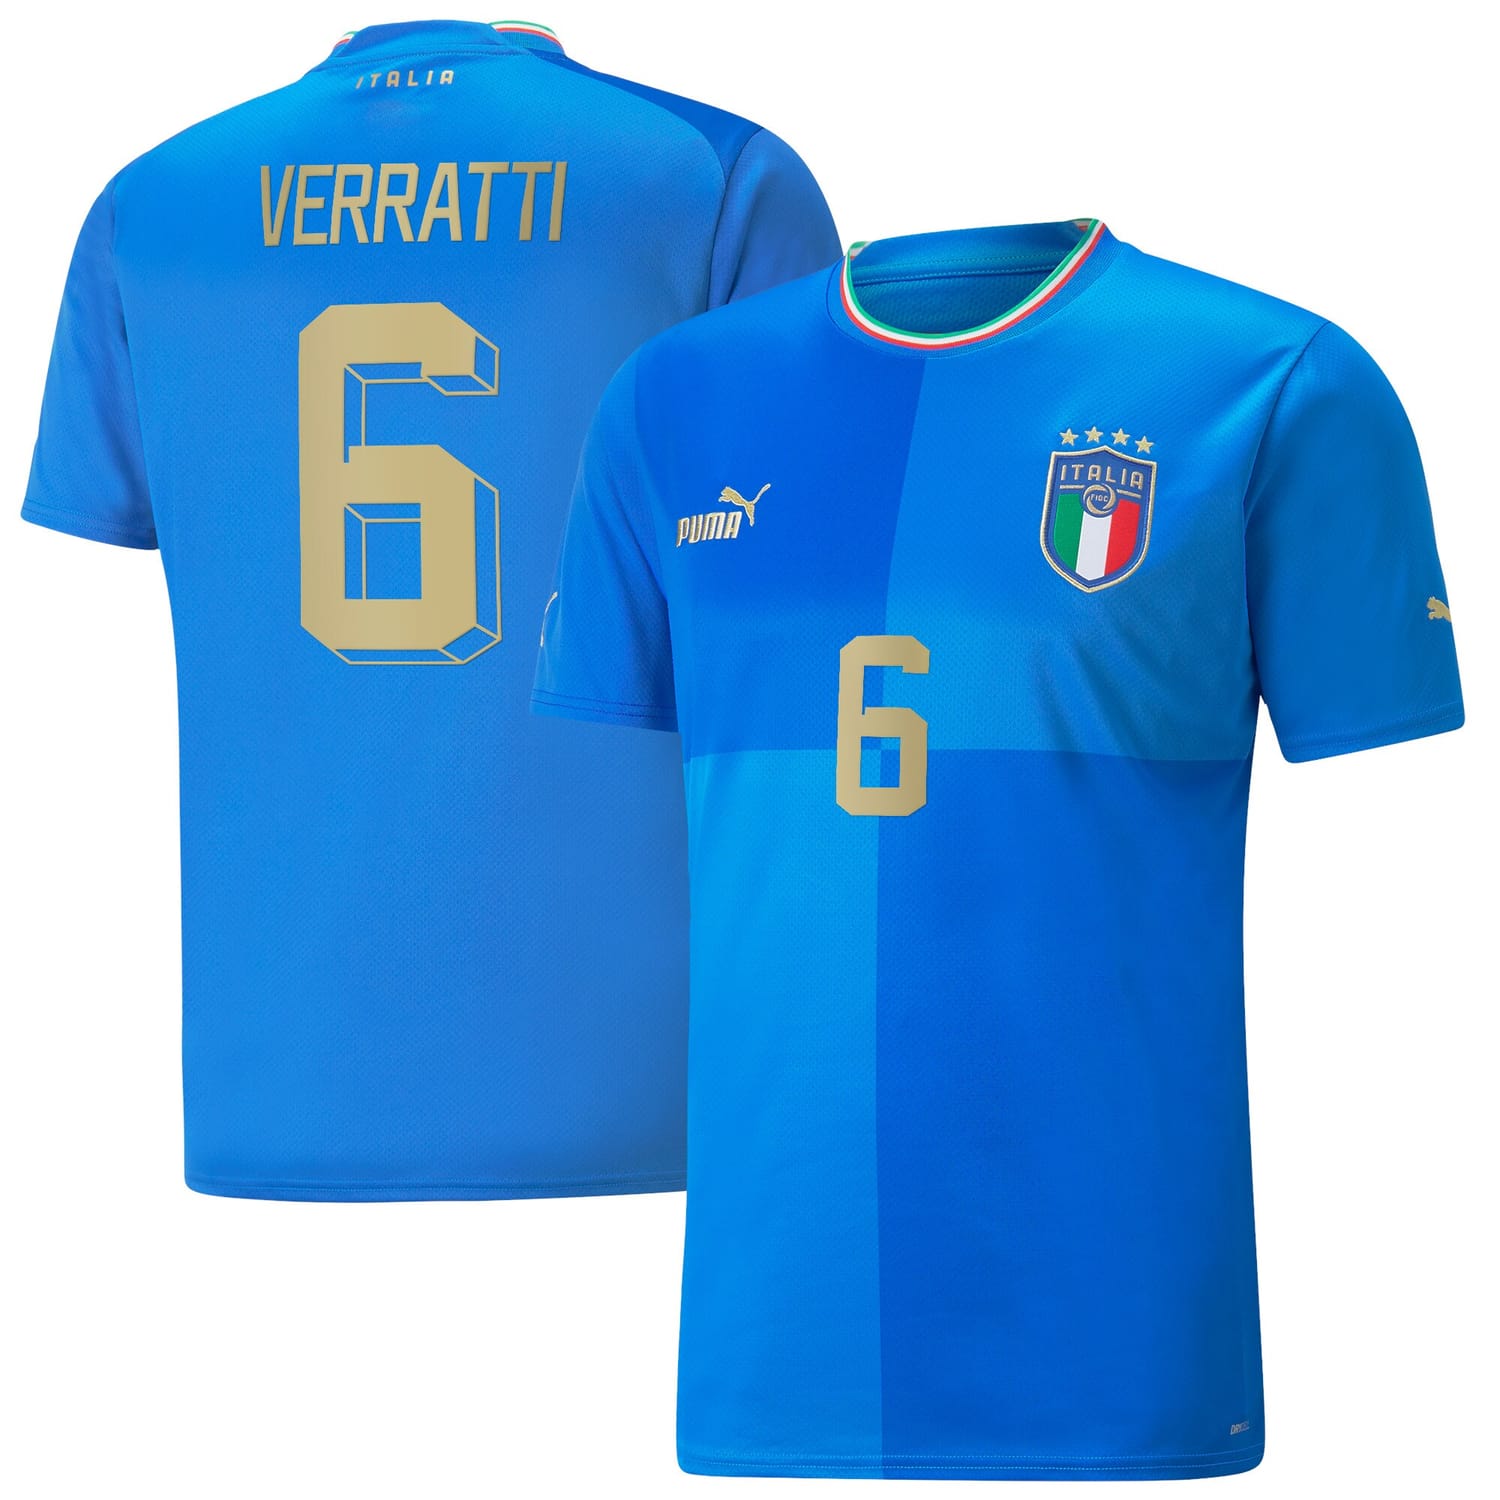 Italy National Team Home Jersey Shirt player Verratti 6 printing for Men